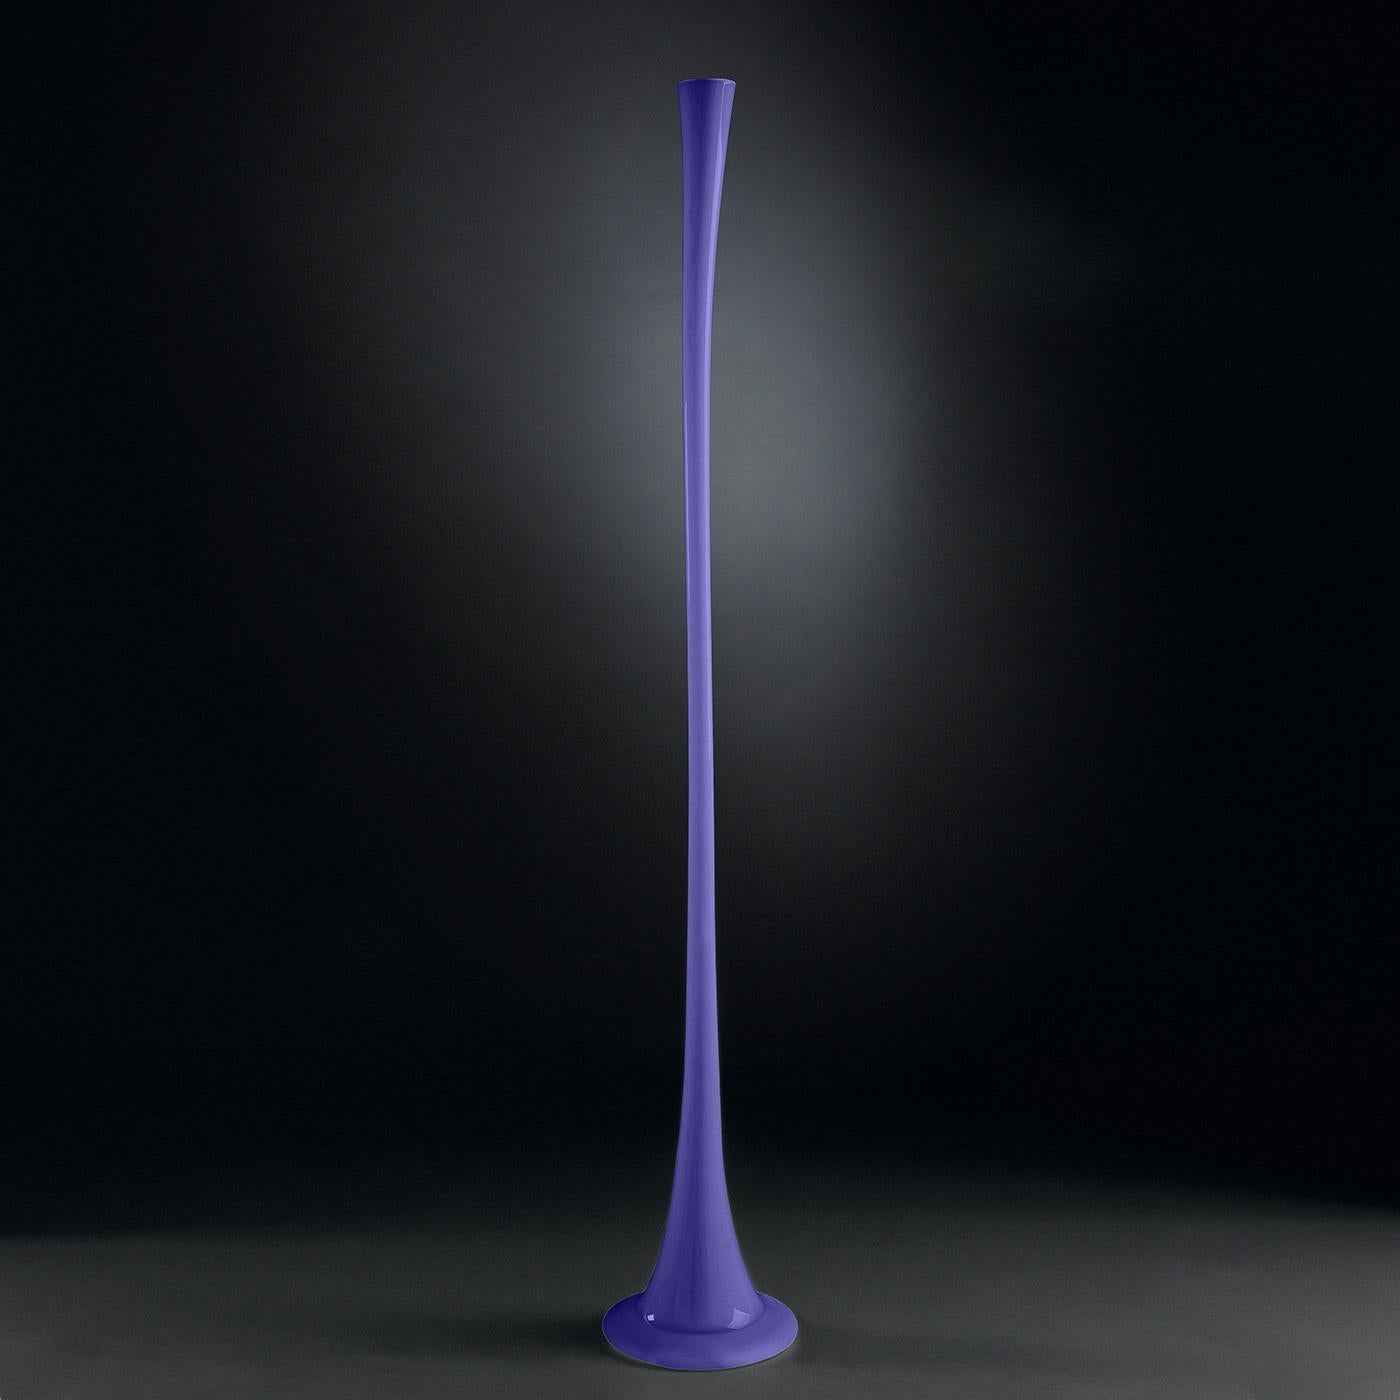 Characterized by a vivid lilac hue and a two-meter tall tapered silhouette, this decorative vase will lend a captivating and innovative quality to a contemporary interior. A refined objet d'art, it is superbly handcrafted of glass by master artisans